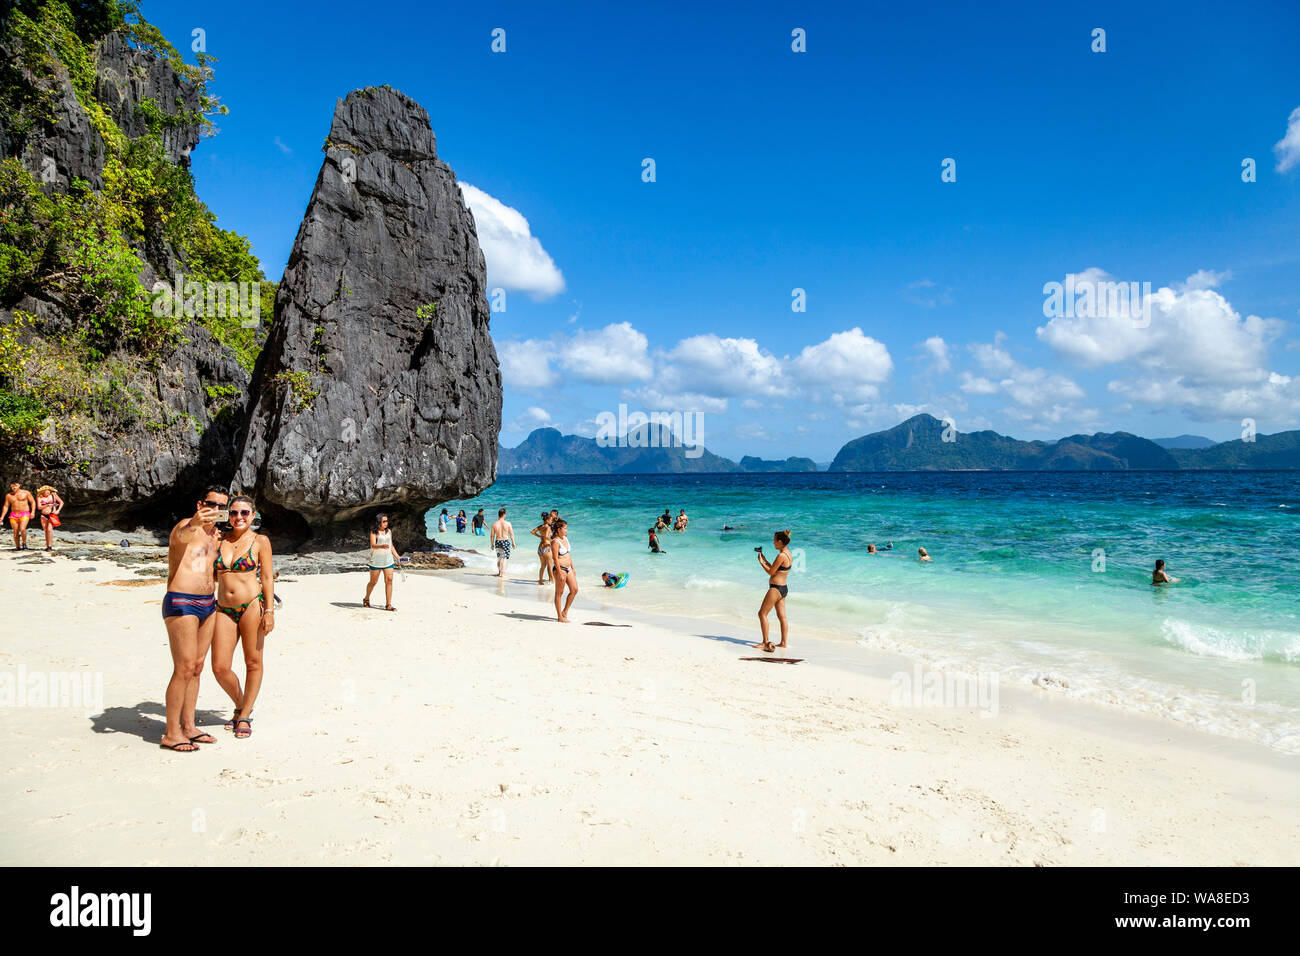 Young Tourists Pose For Photos On Entalula Beach, El Nido, Palawan, The Philippines Stock Photo